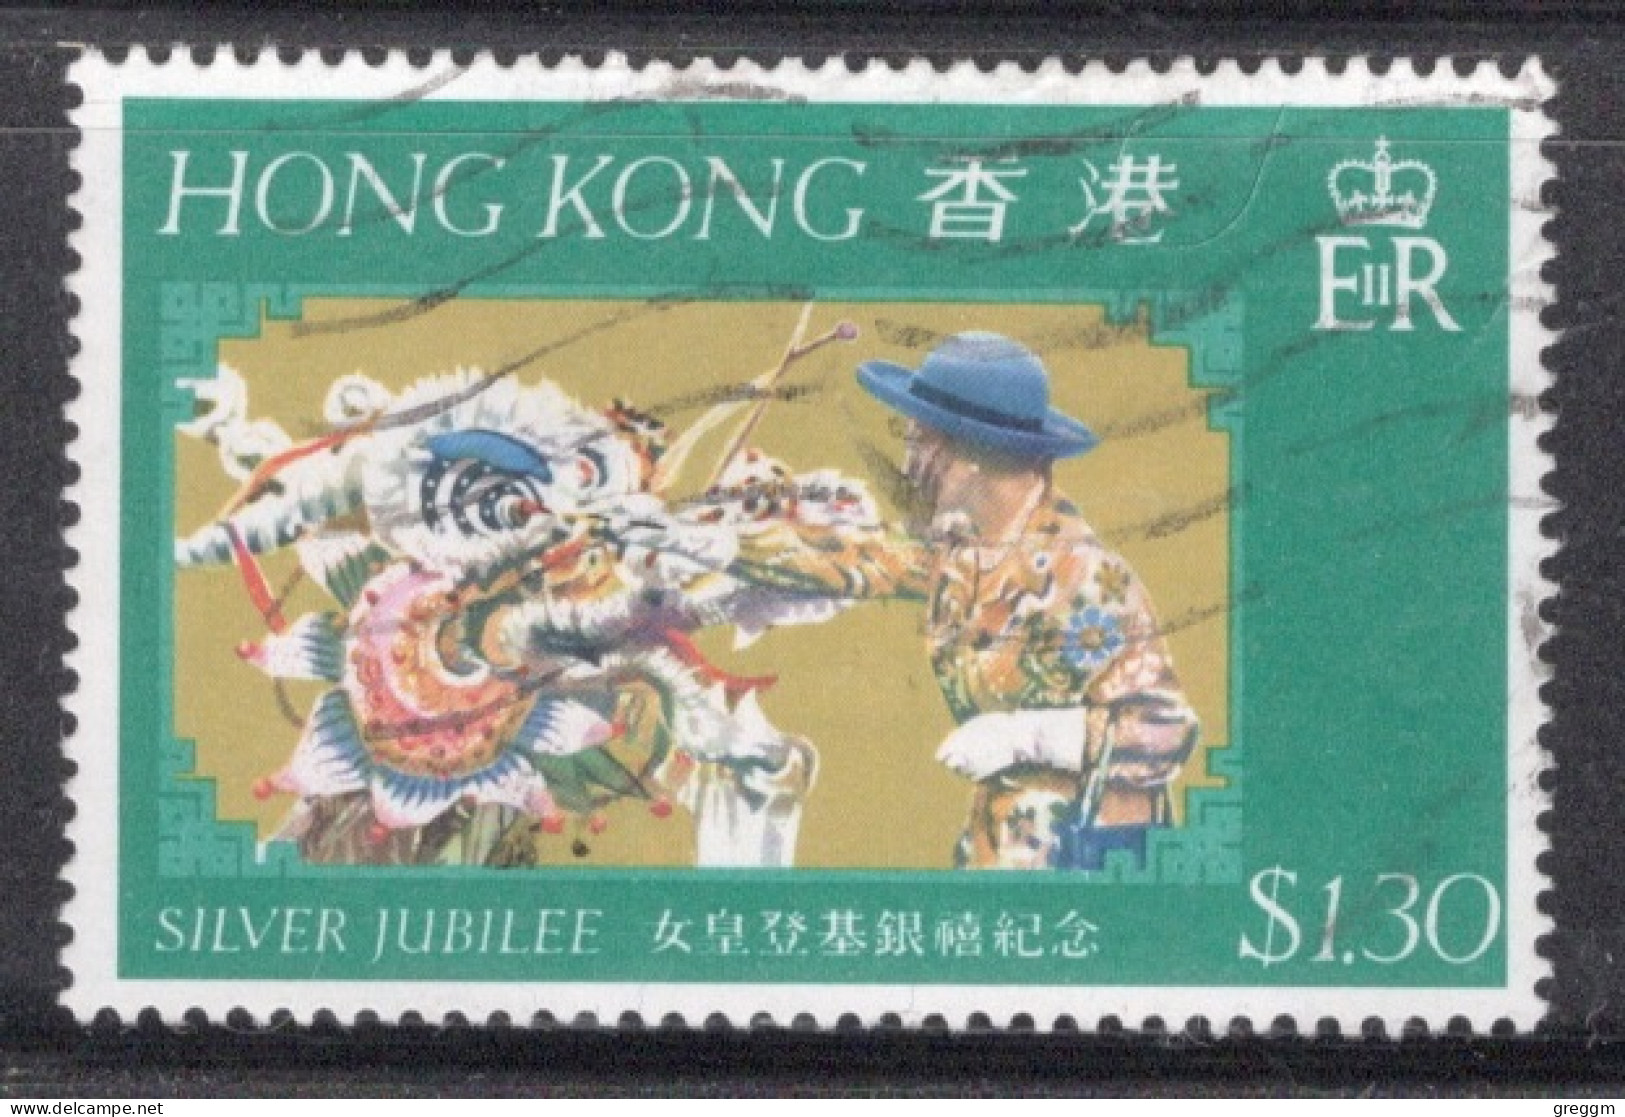 Hong Kong 1977 A Single Stamp To Celebrate  The 25th Anniversary Of Queen Elizabeth II's Regency In Fine Used - Gebraucht